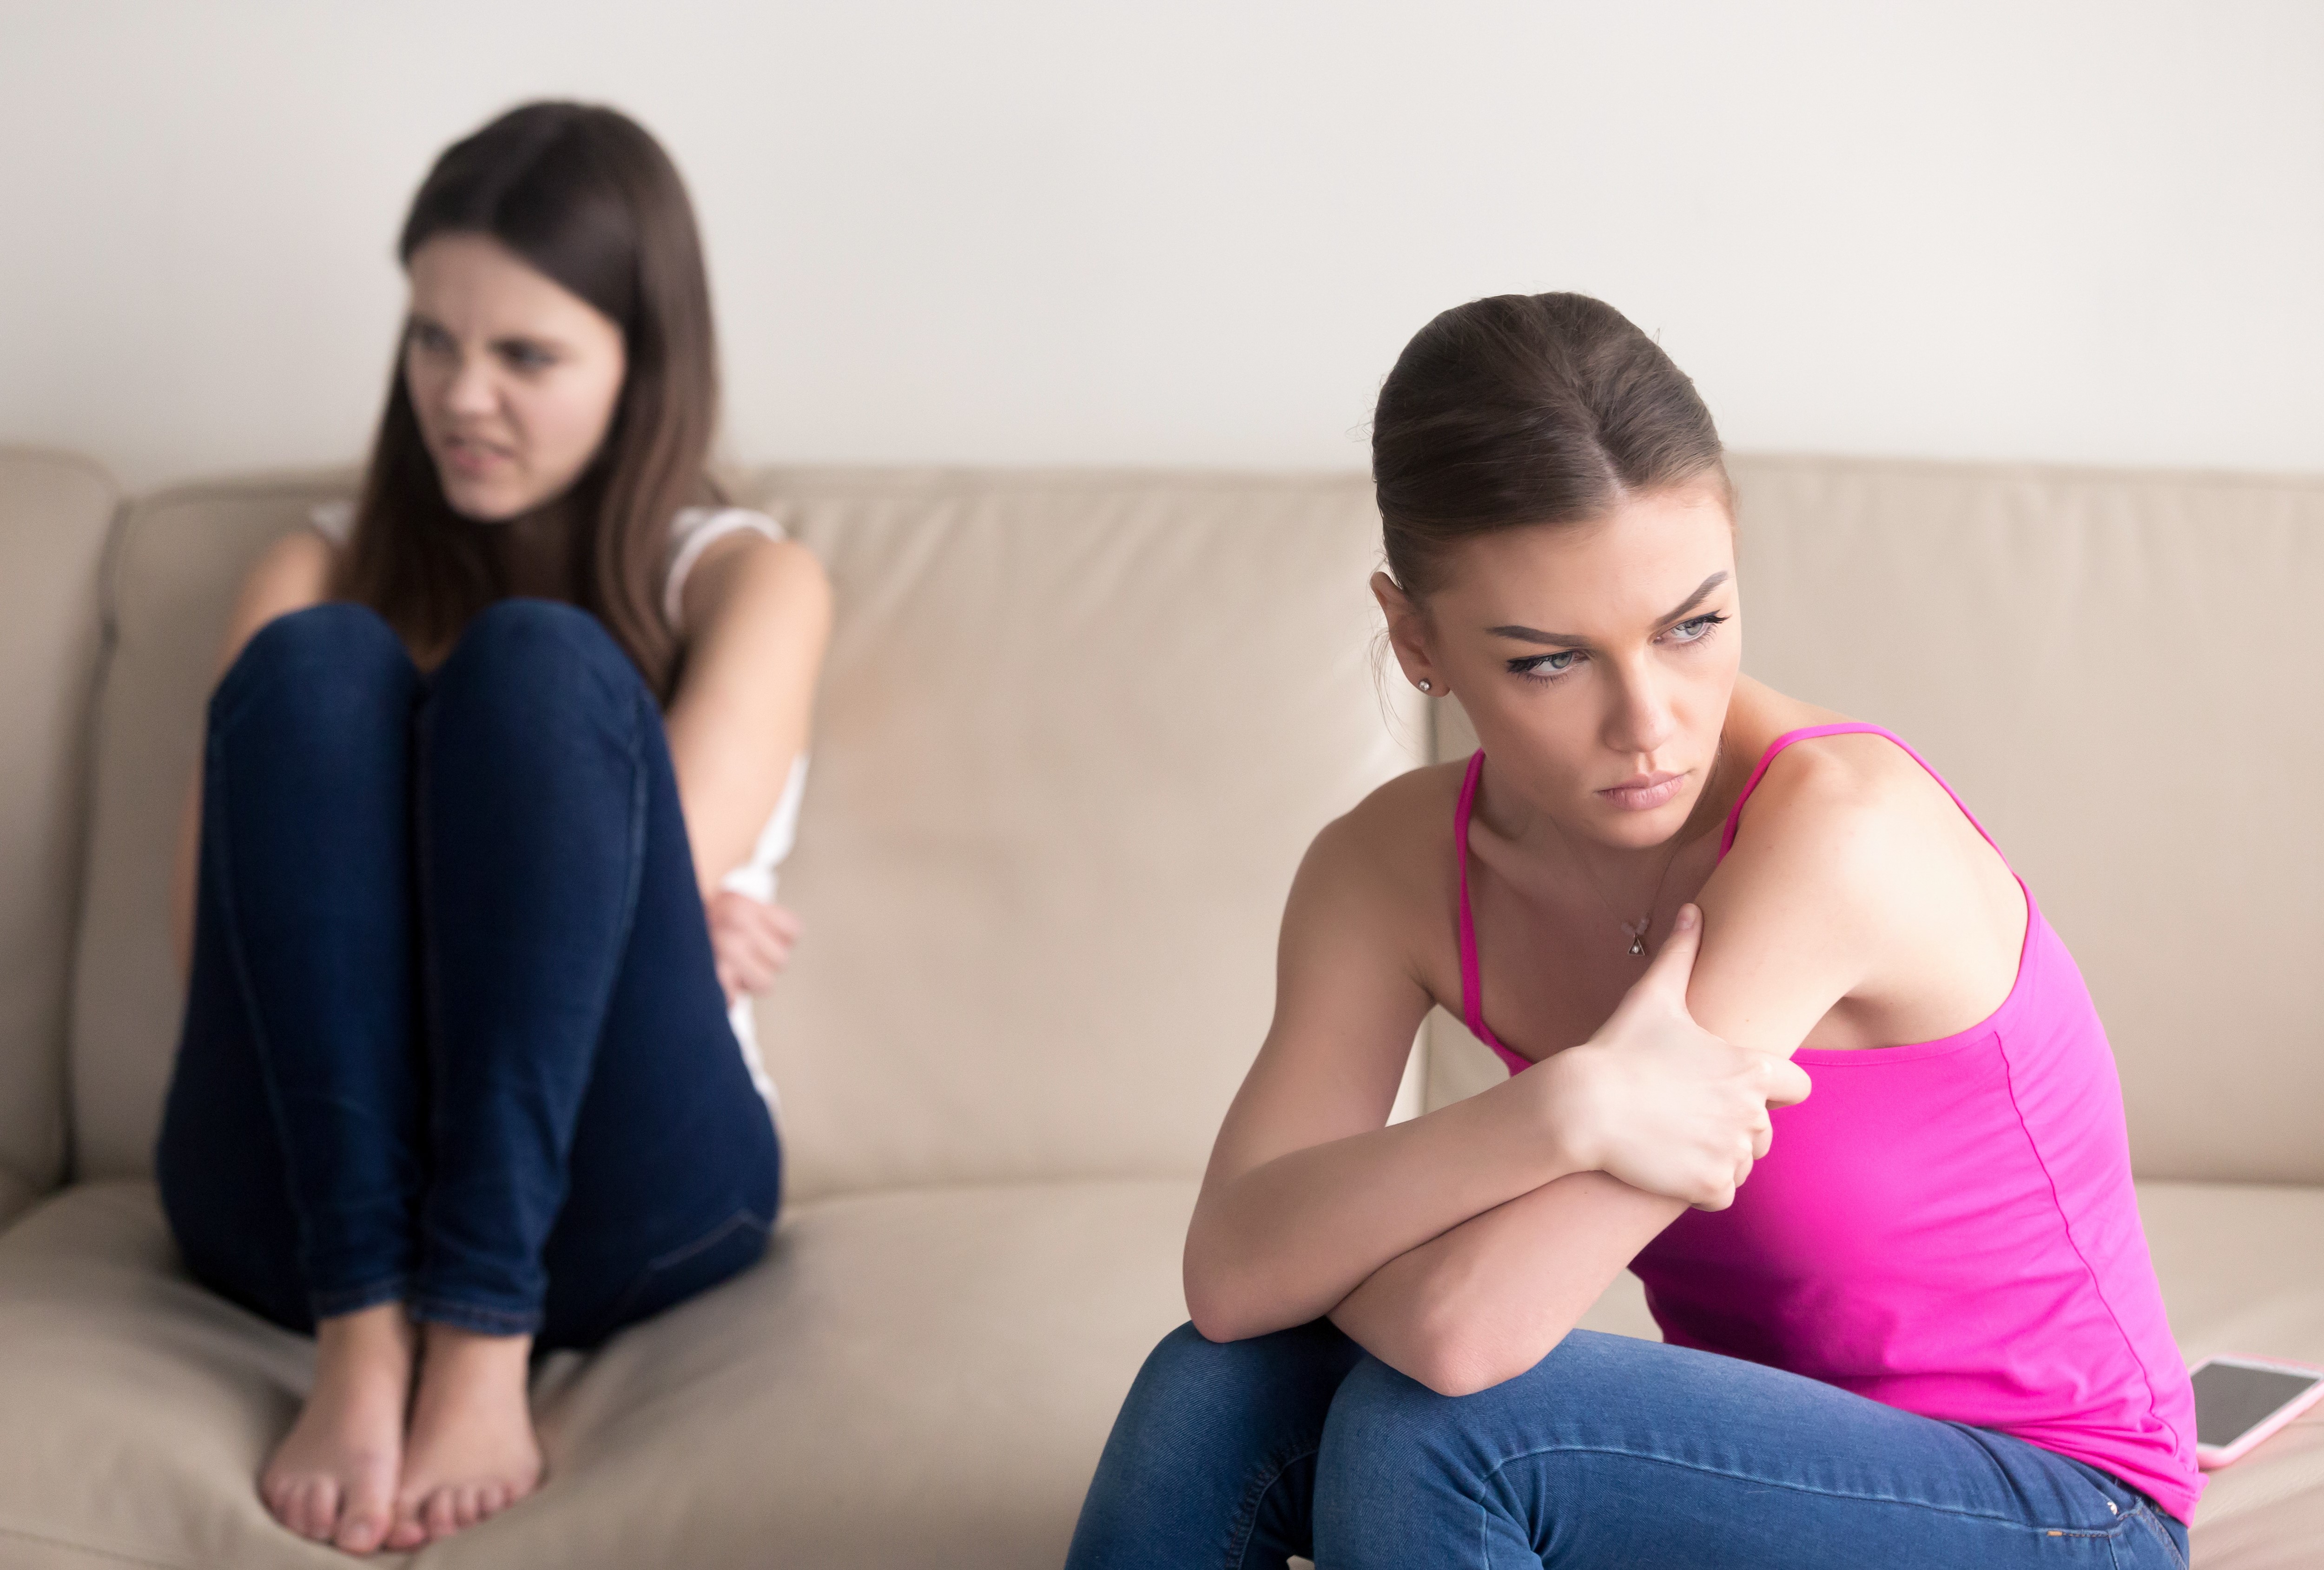 Siblings after an argument | Source: Getty Images